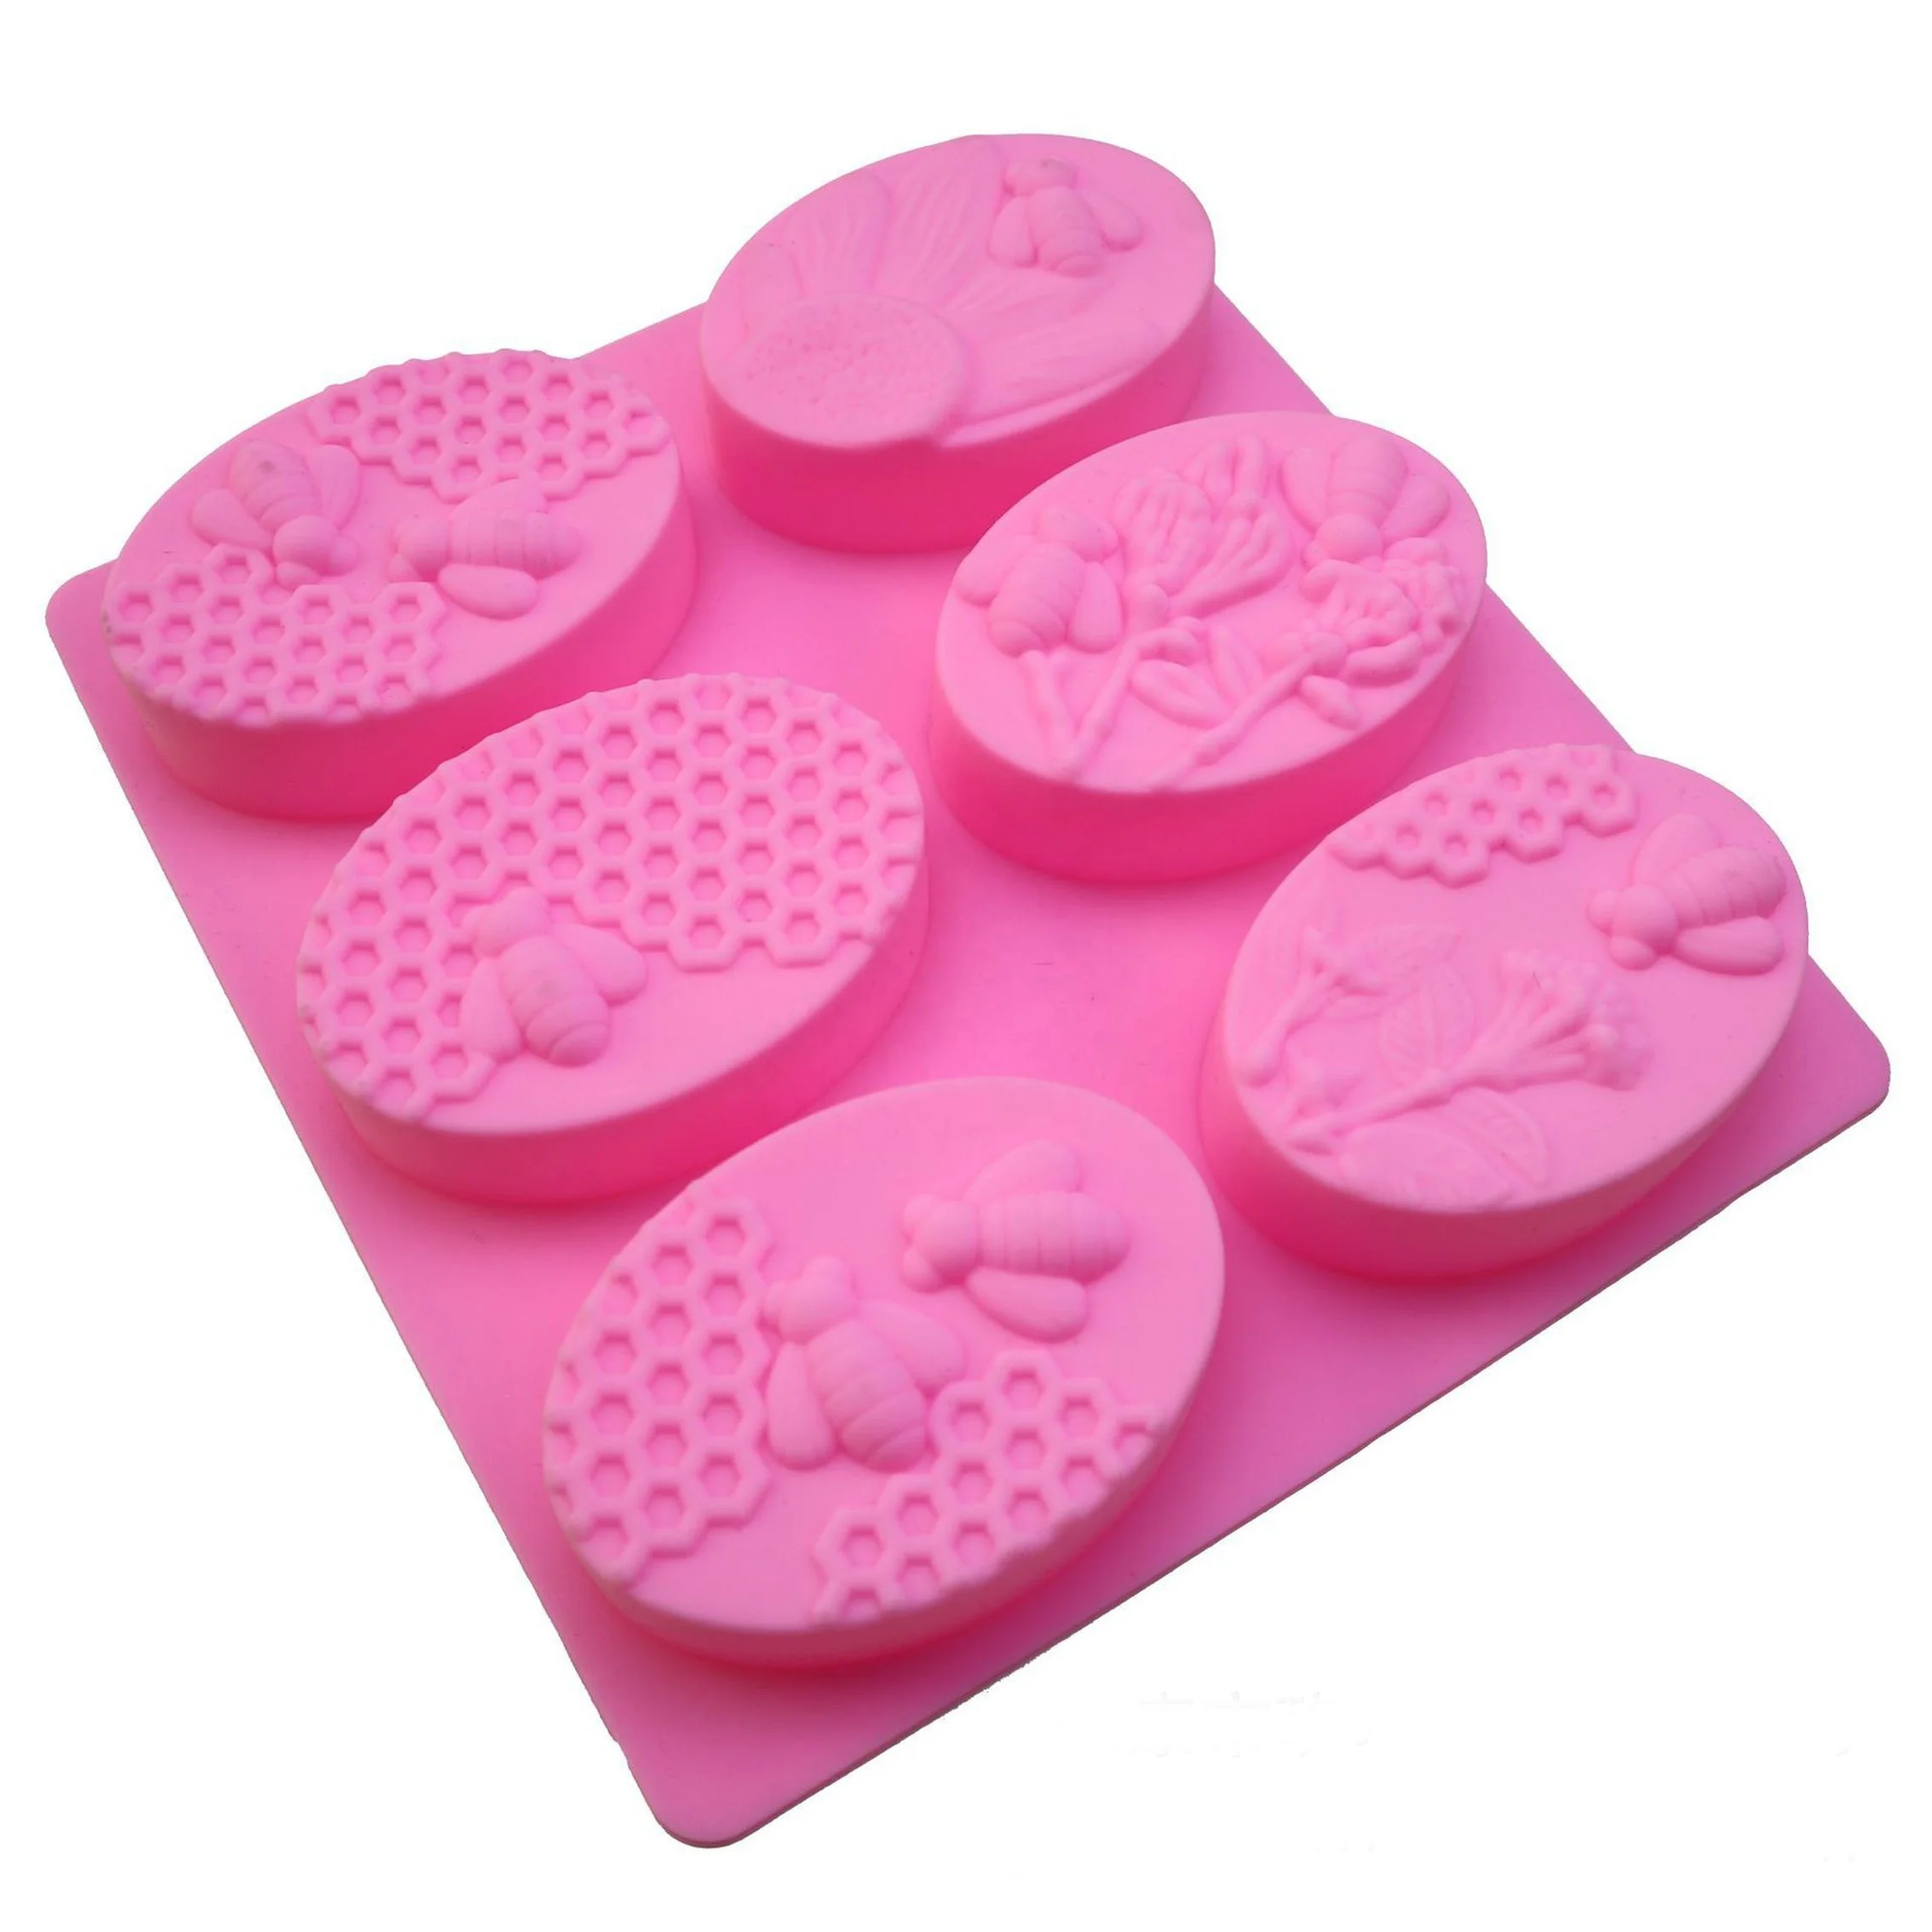 6 hole honey bee and honeycomb shape soap mold silicone cake mold silicone hand make diy soap candle resin silicone bpa free